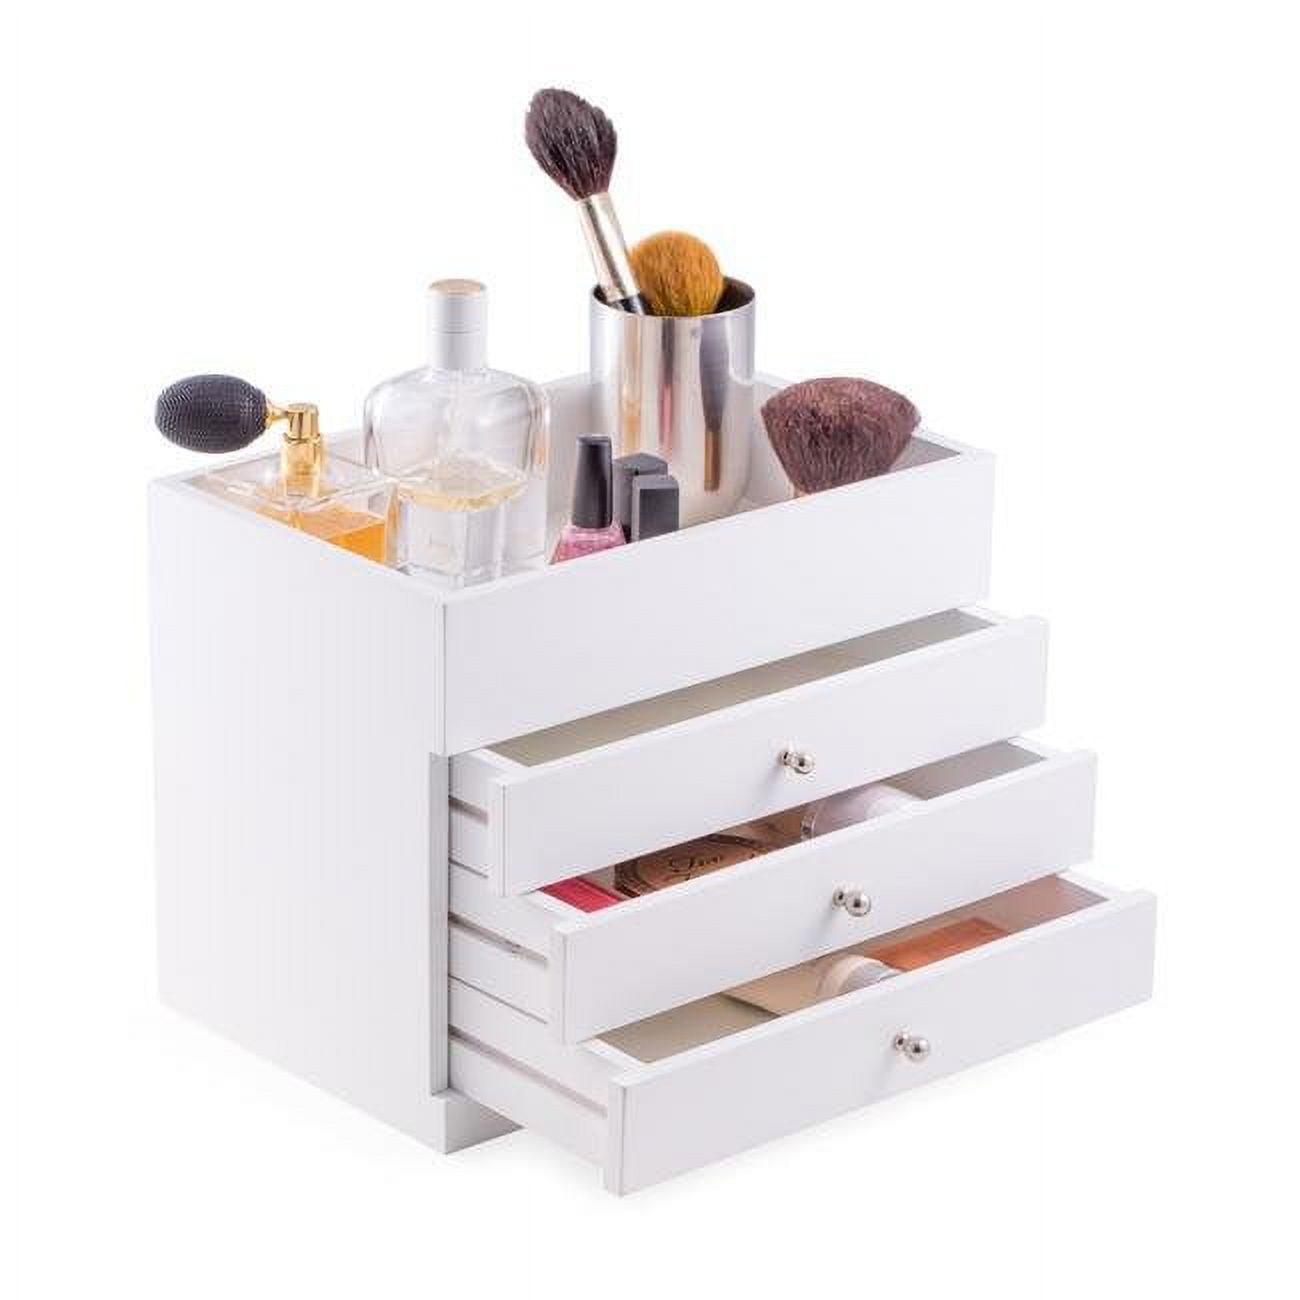 Picture of Bey-Berk International BB685WHT White Wood Makeup Case with Open Top - 3 Drawers